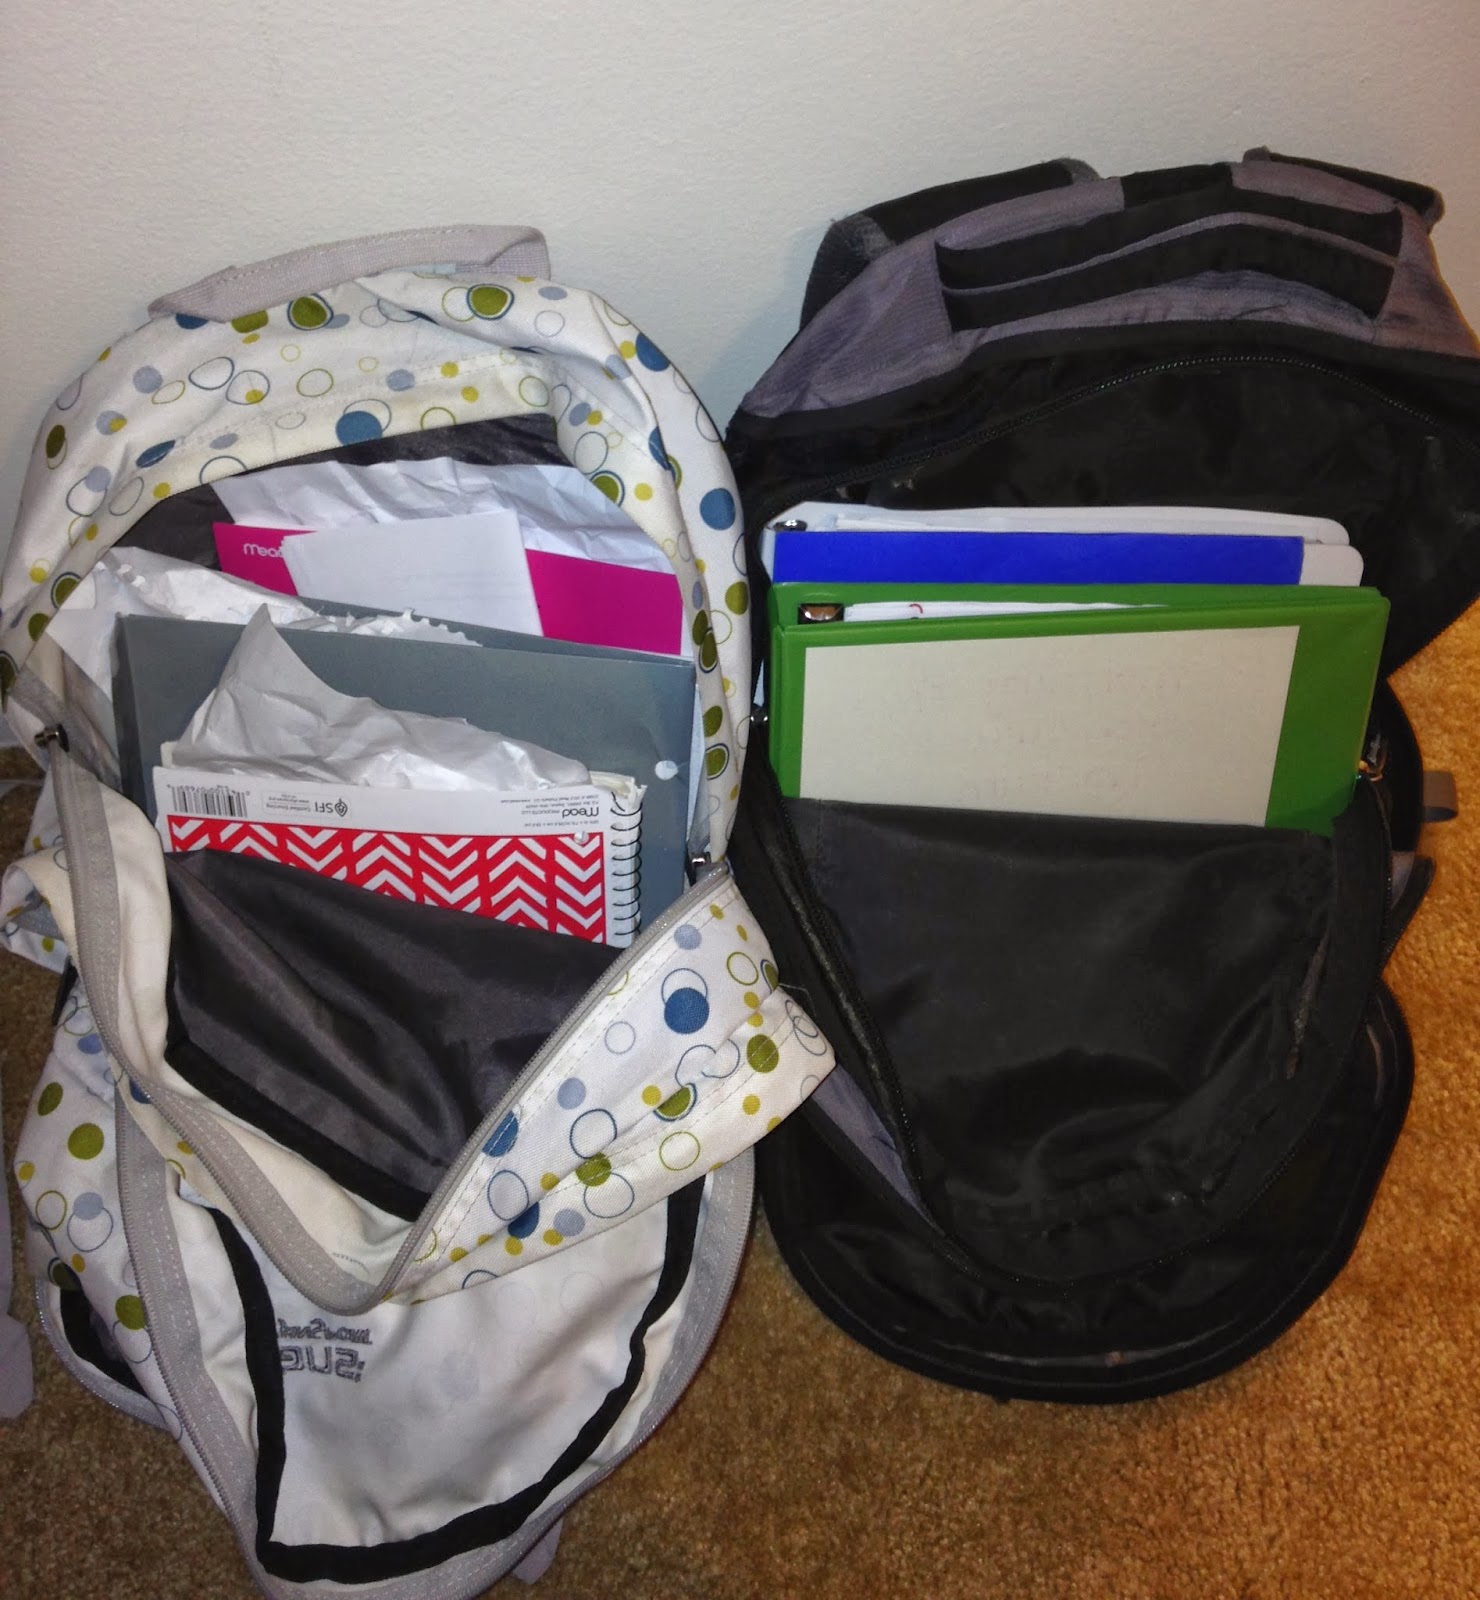 School counselor blog backpack. Binder clipart messy